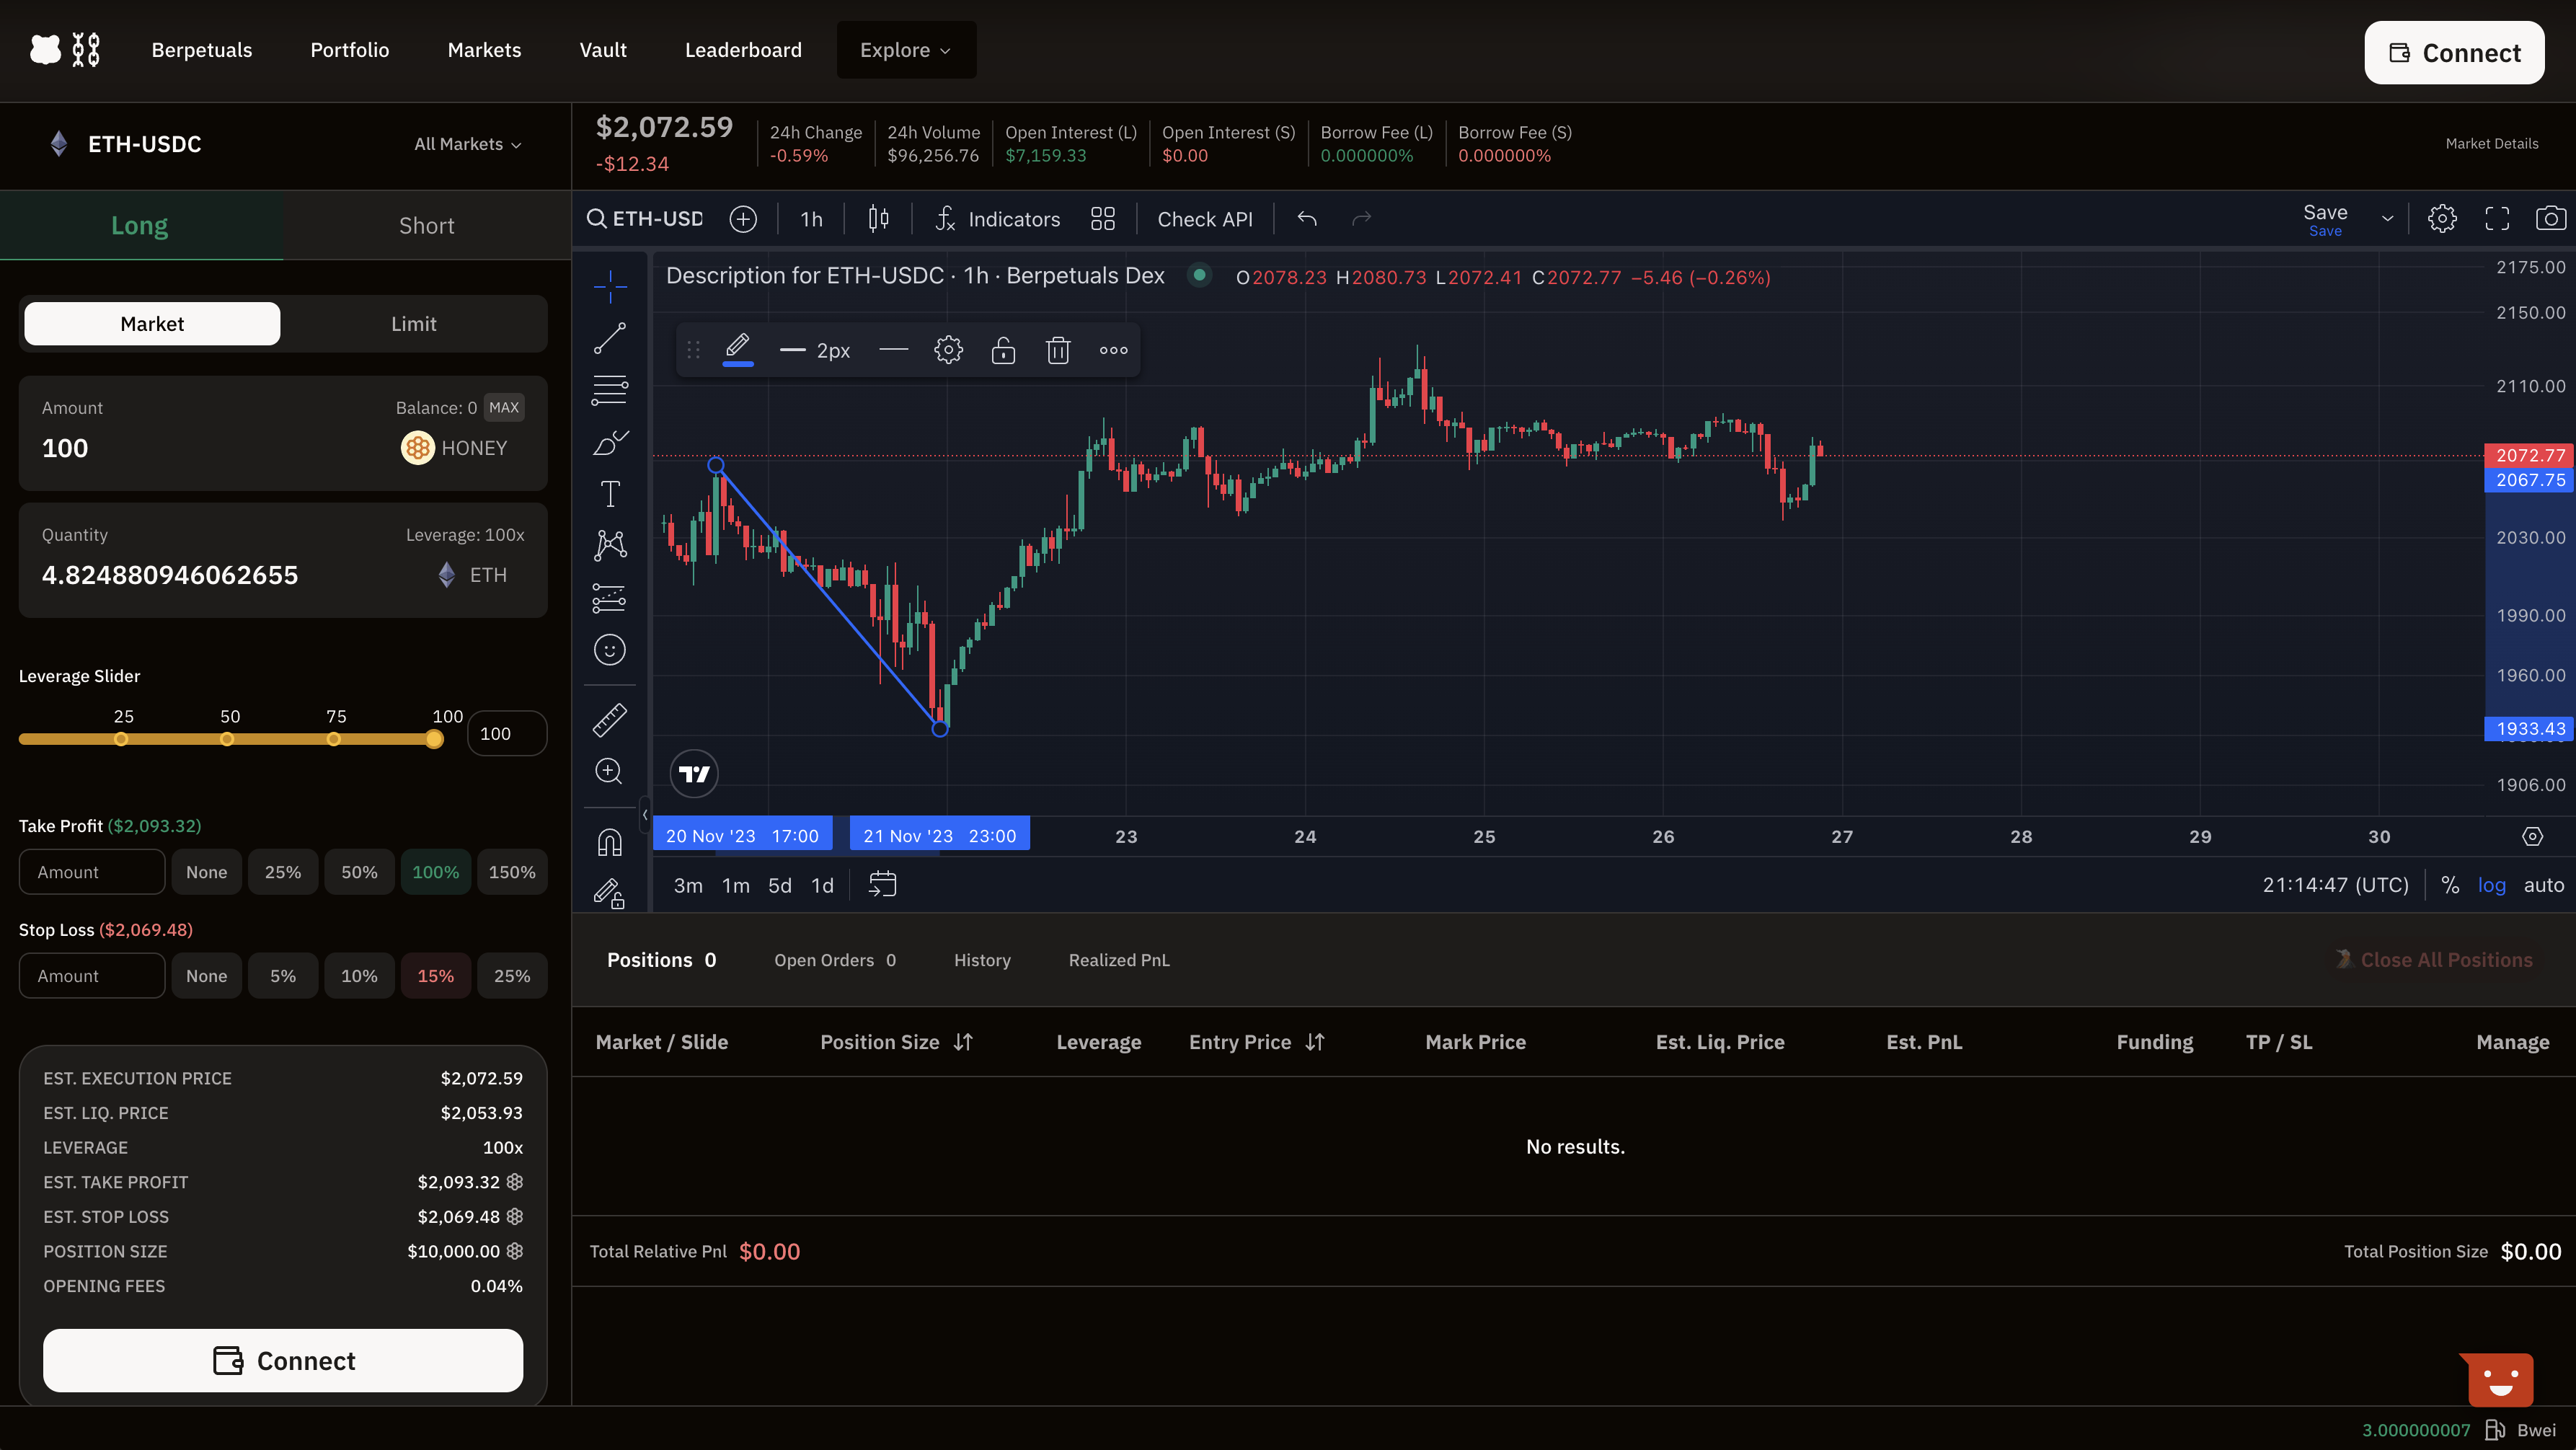 Berps UI & Trading Experience